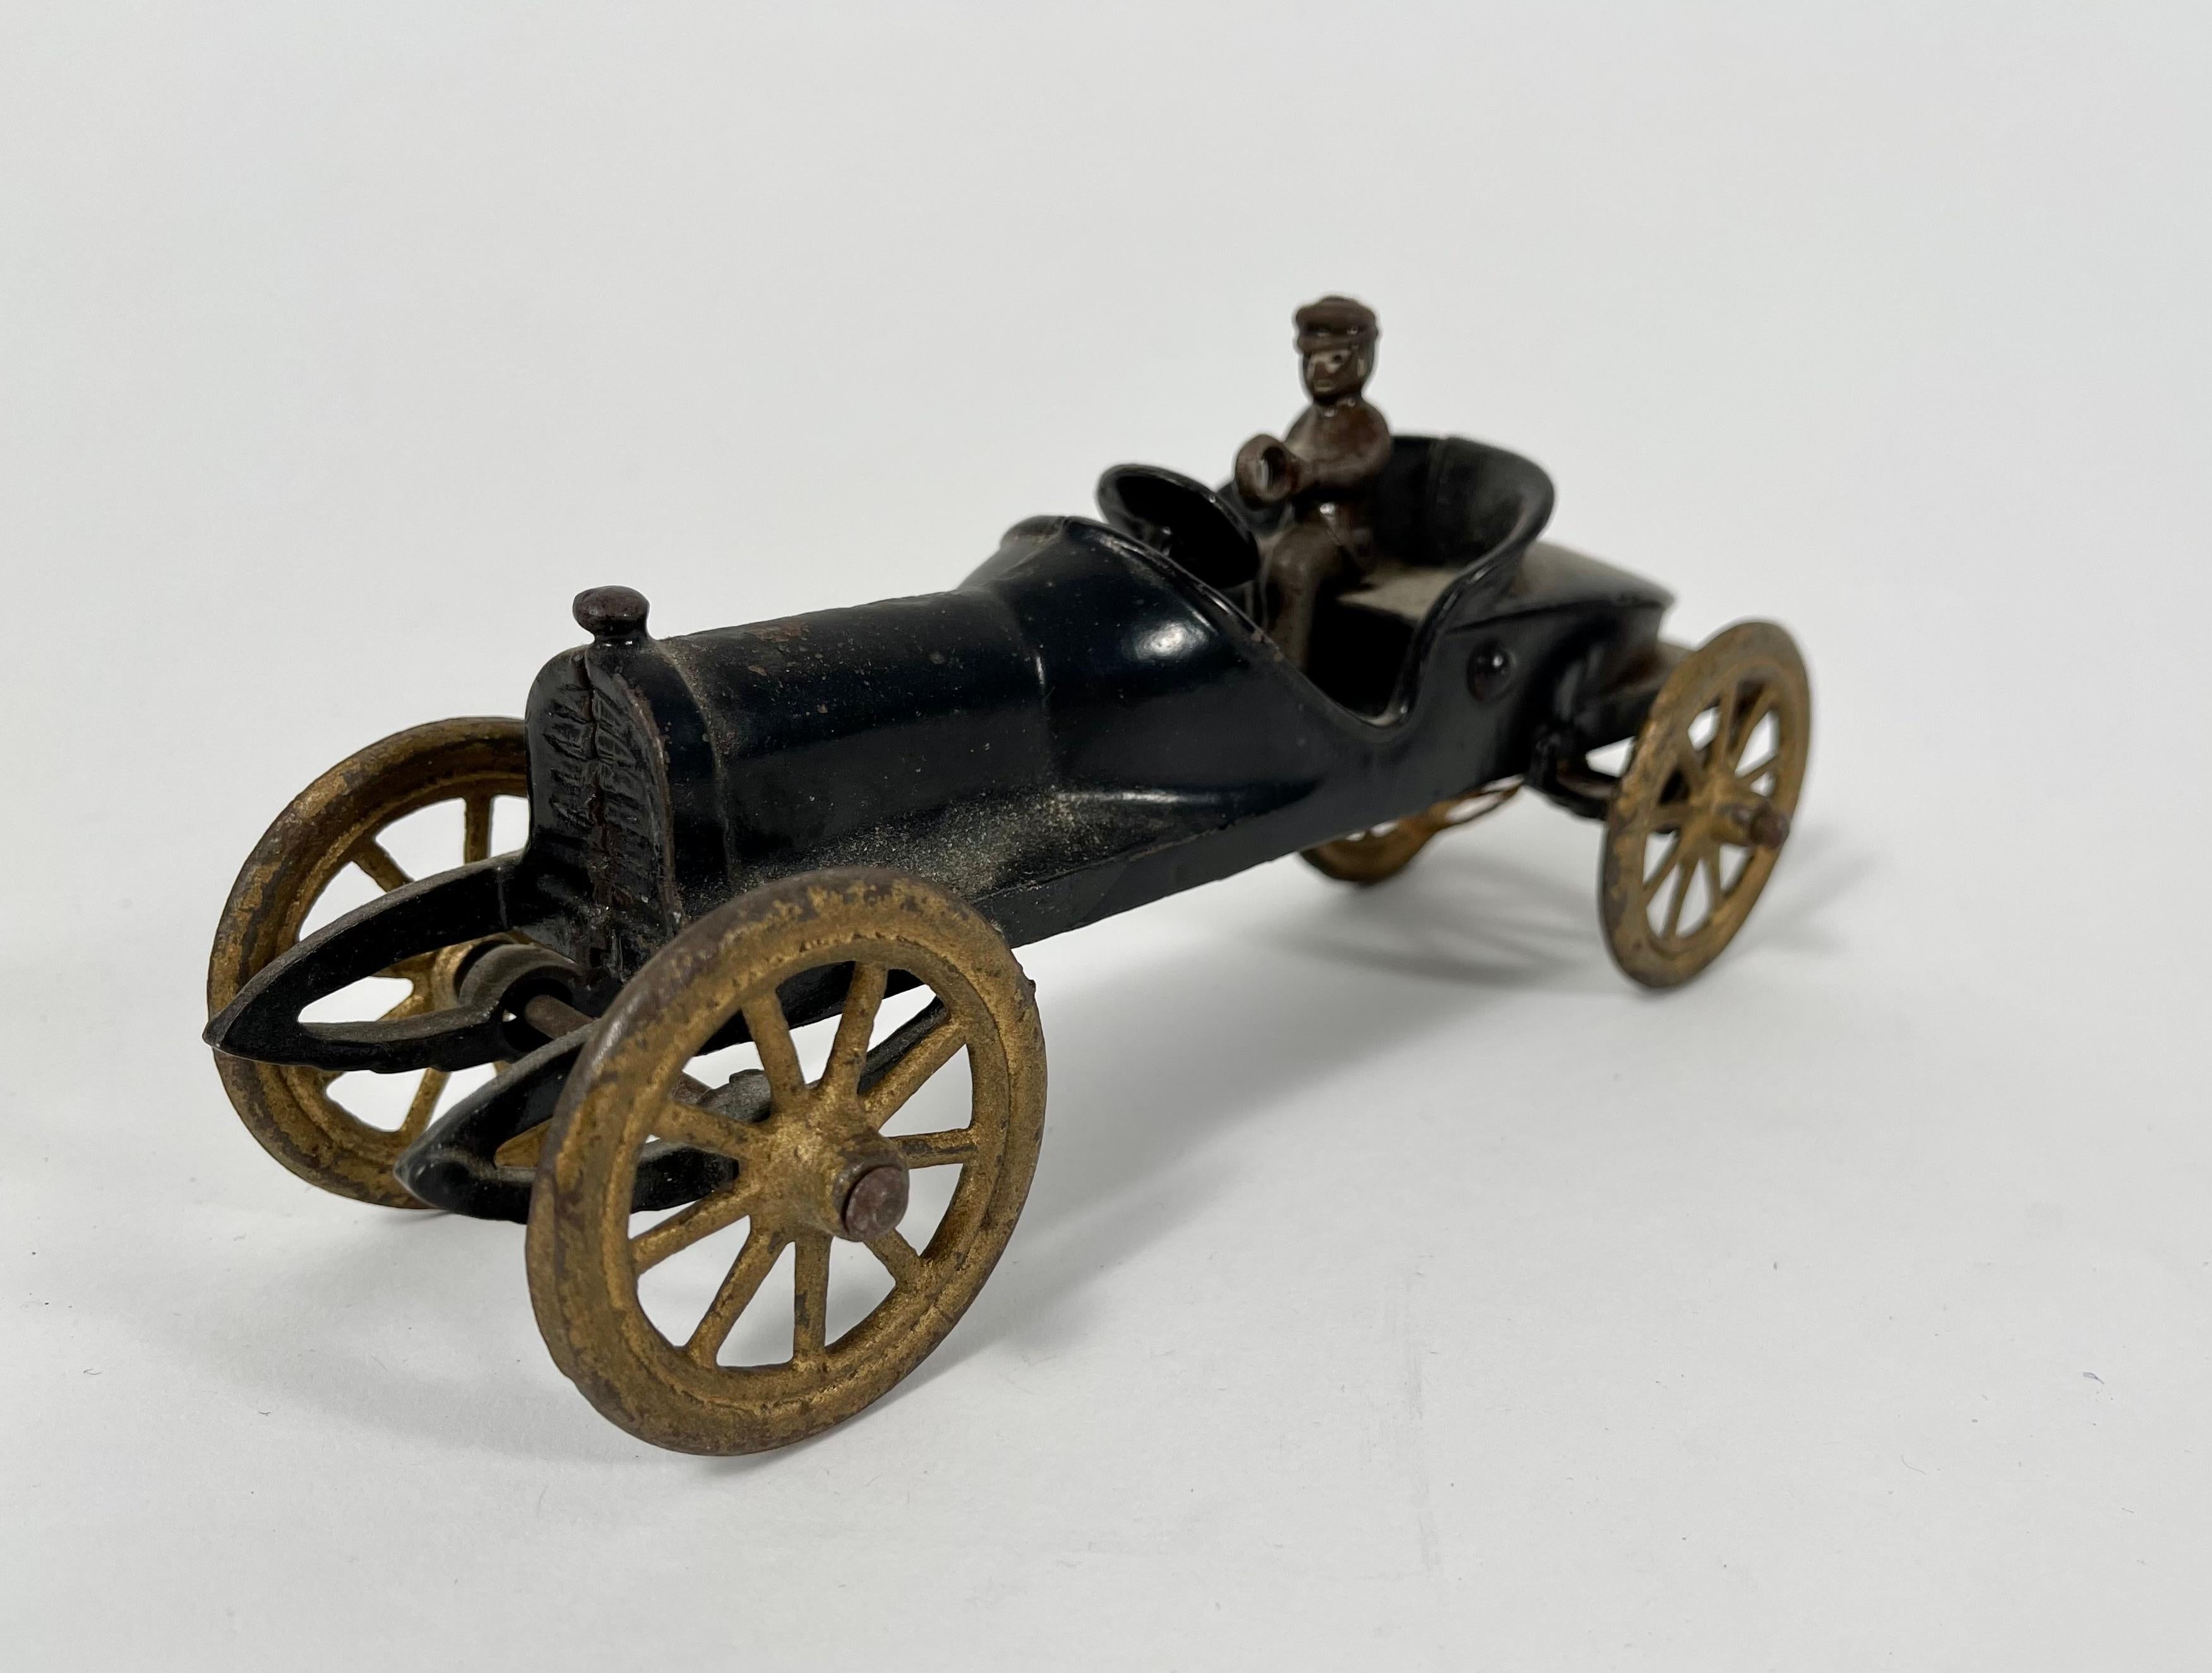 A vintage black painted metal toy race car, circa 1920s with associated removable driver.